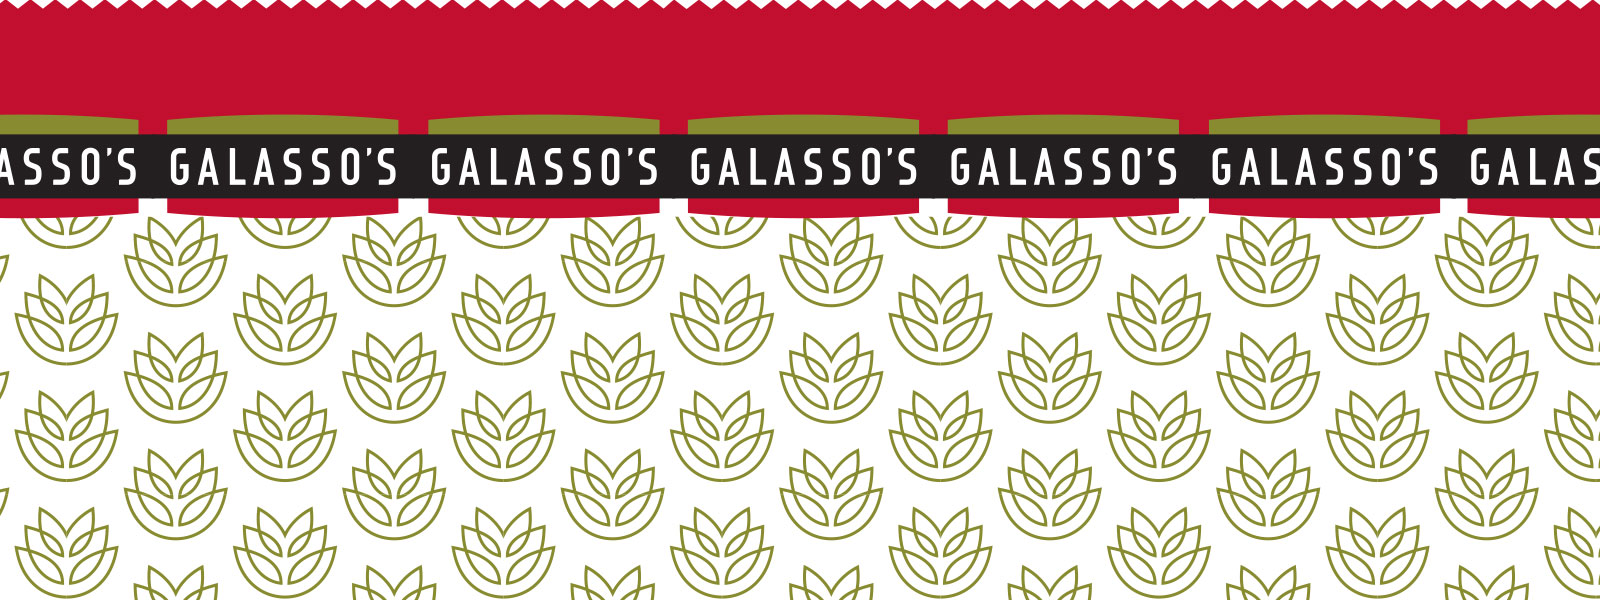 Repeating wheat pattern and Galasso's logo